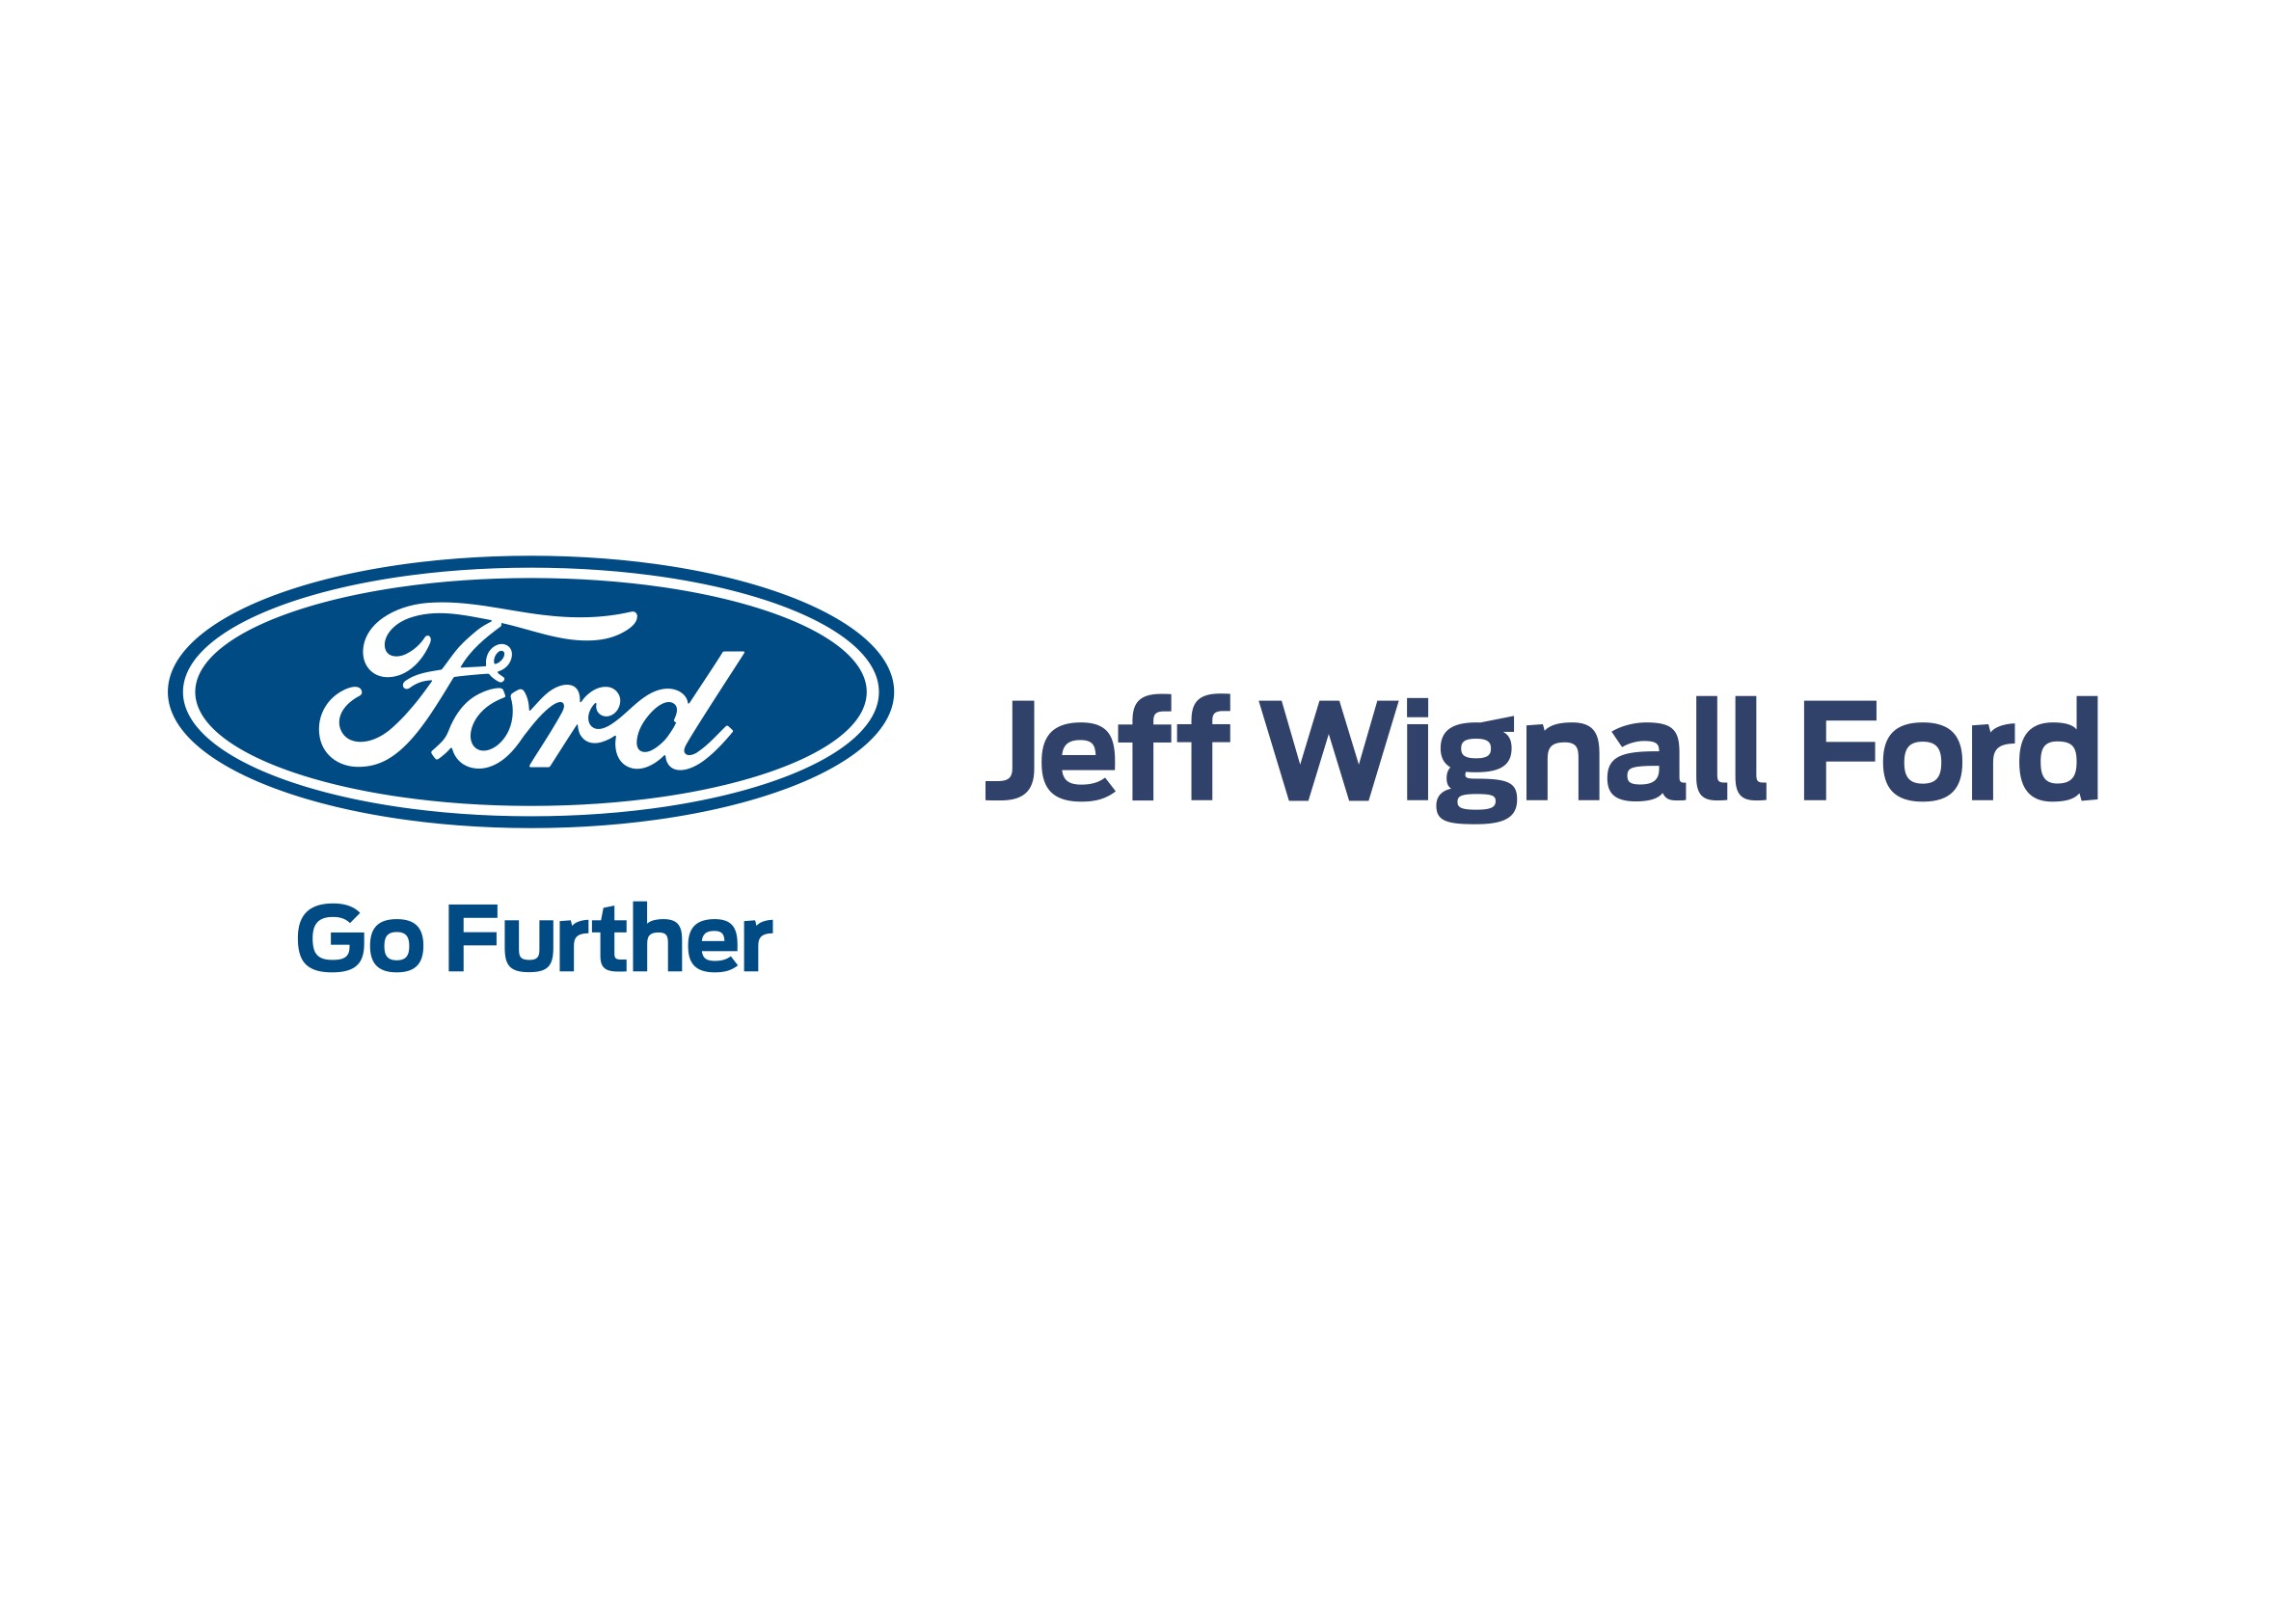 Jeff Wignall Ford supporting the Steelers